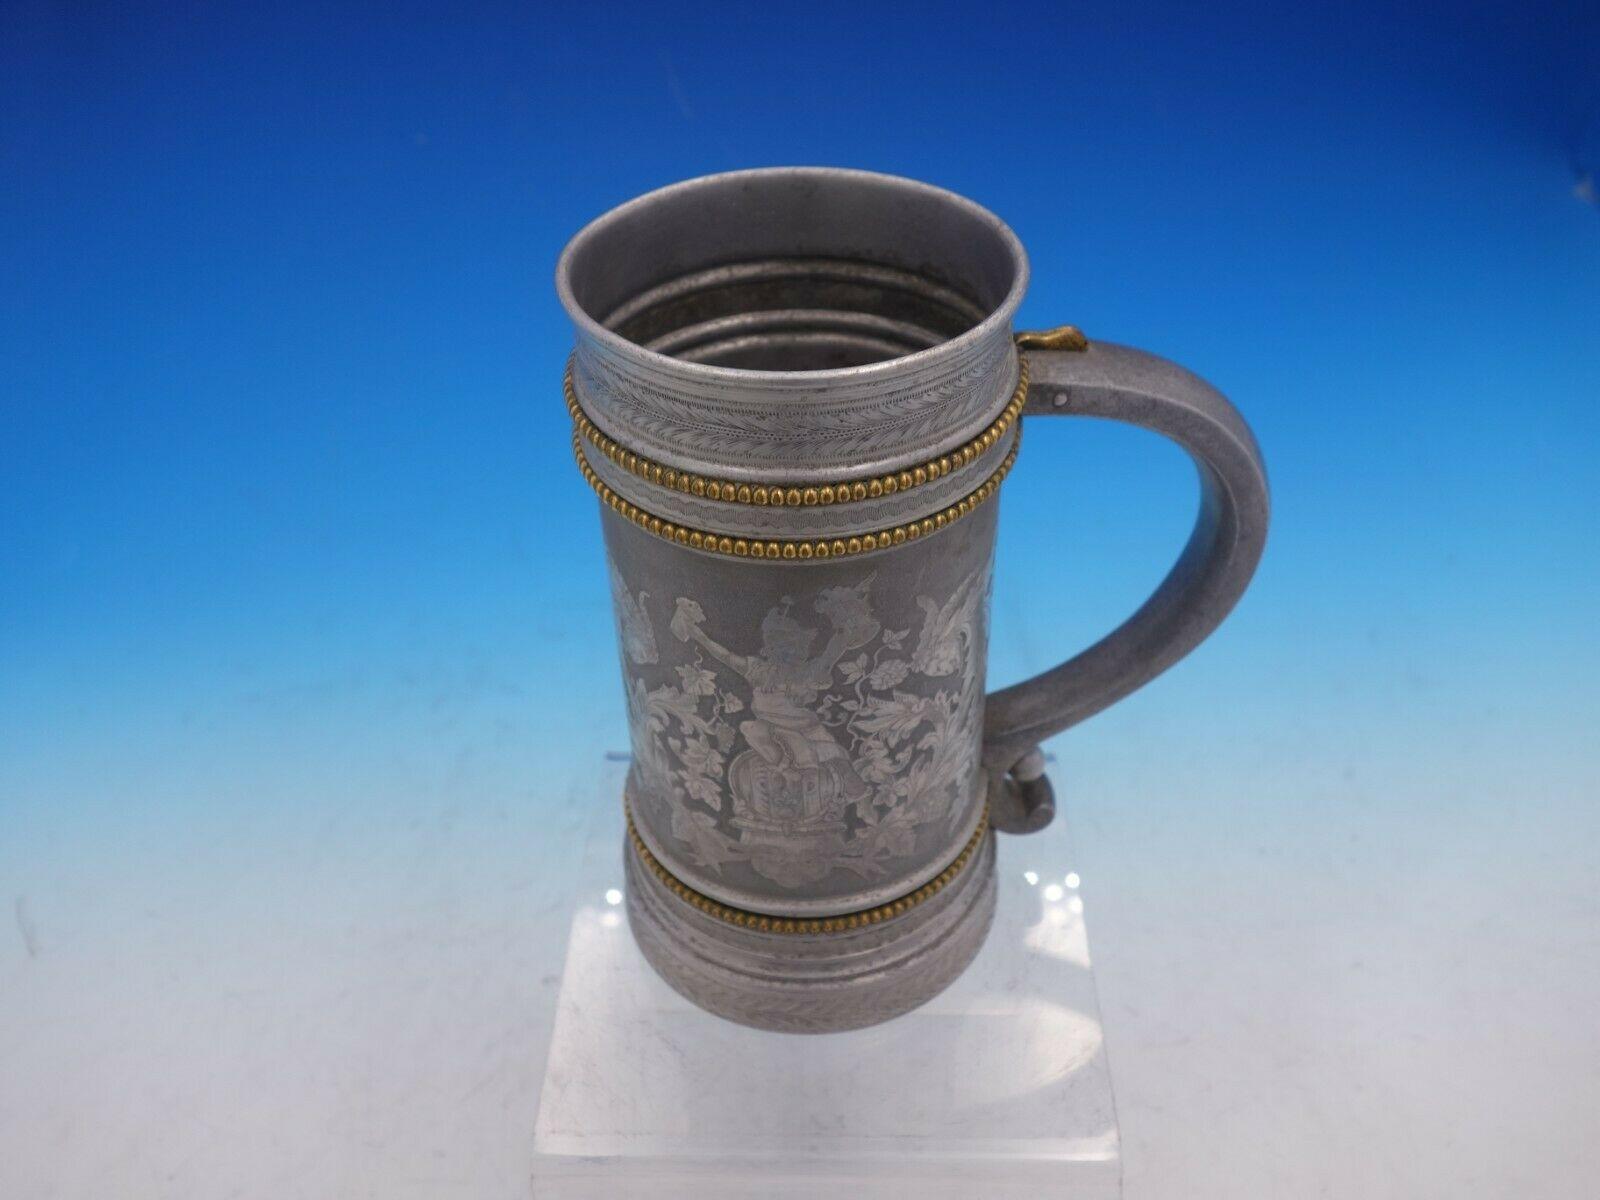 Gorham

Mixed metals by Gorham mug rave aluminum with applied bronze beading, acid etched man on wood barrel holding a mug in each hand, acid etched hops, and acid etched grapes marked #11. It measures 6 1/2